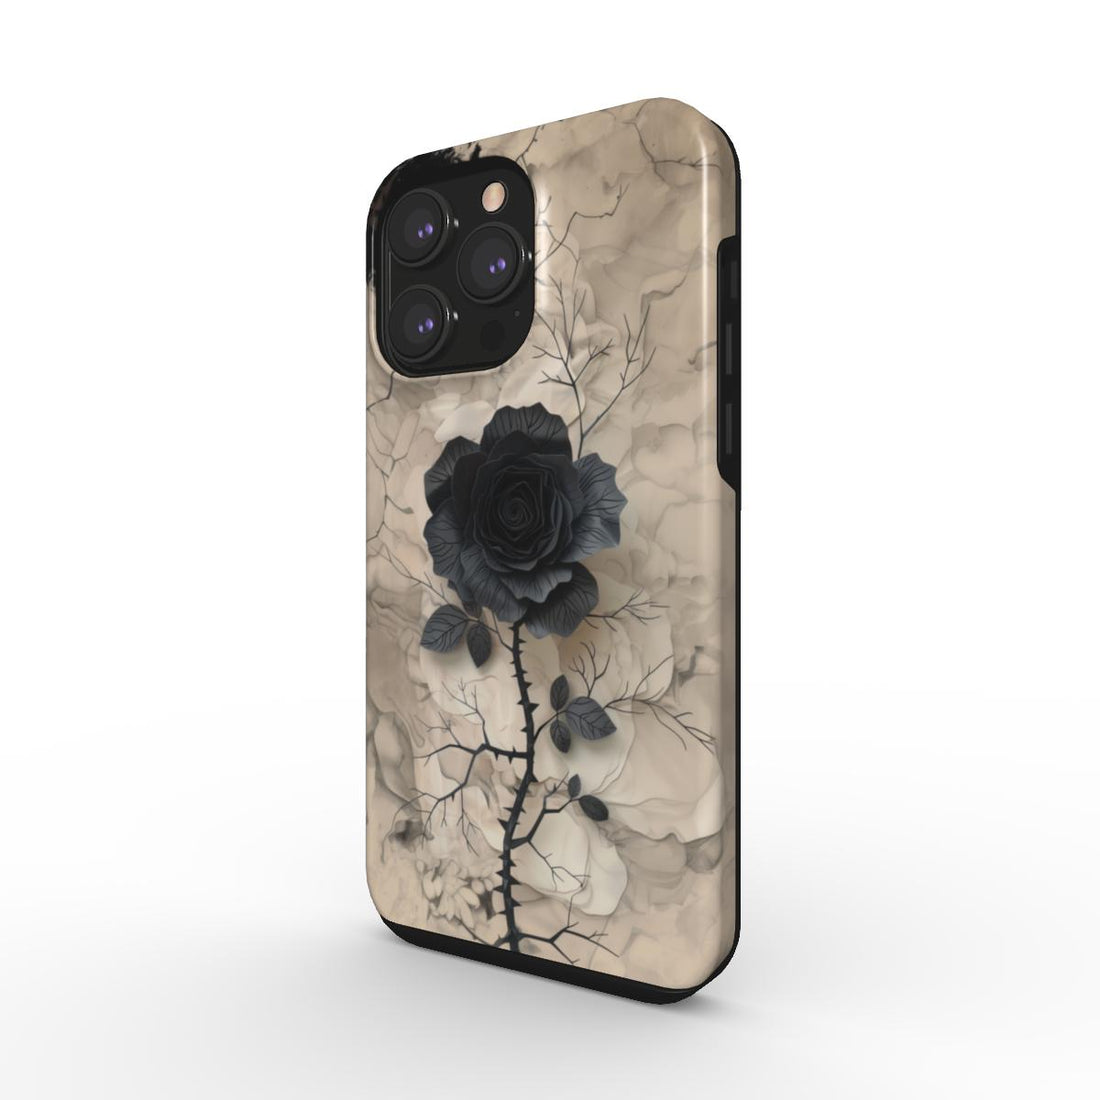 The Rose of Shadows Phone Case